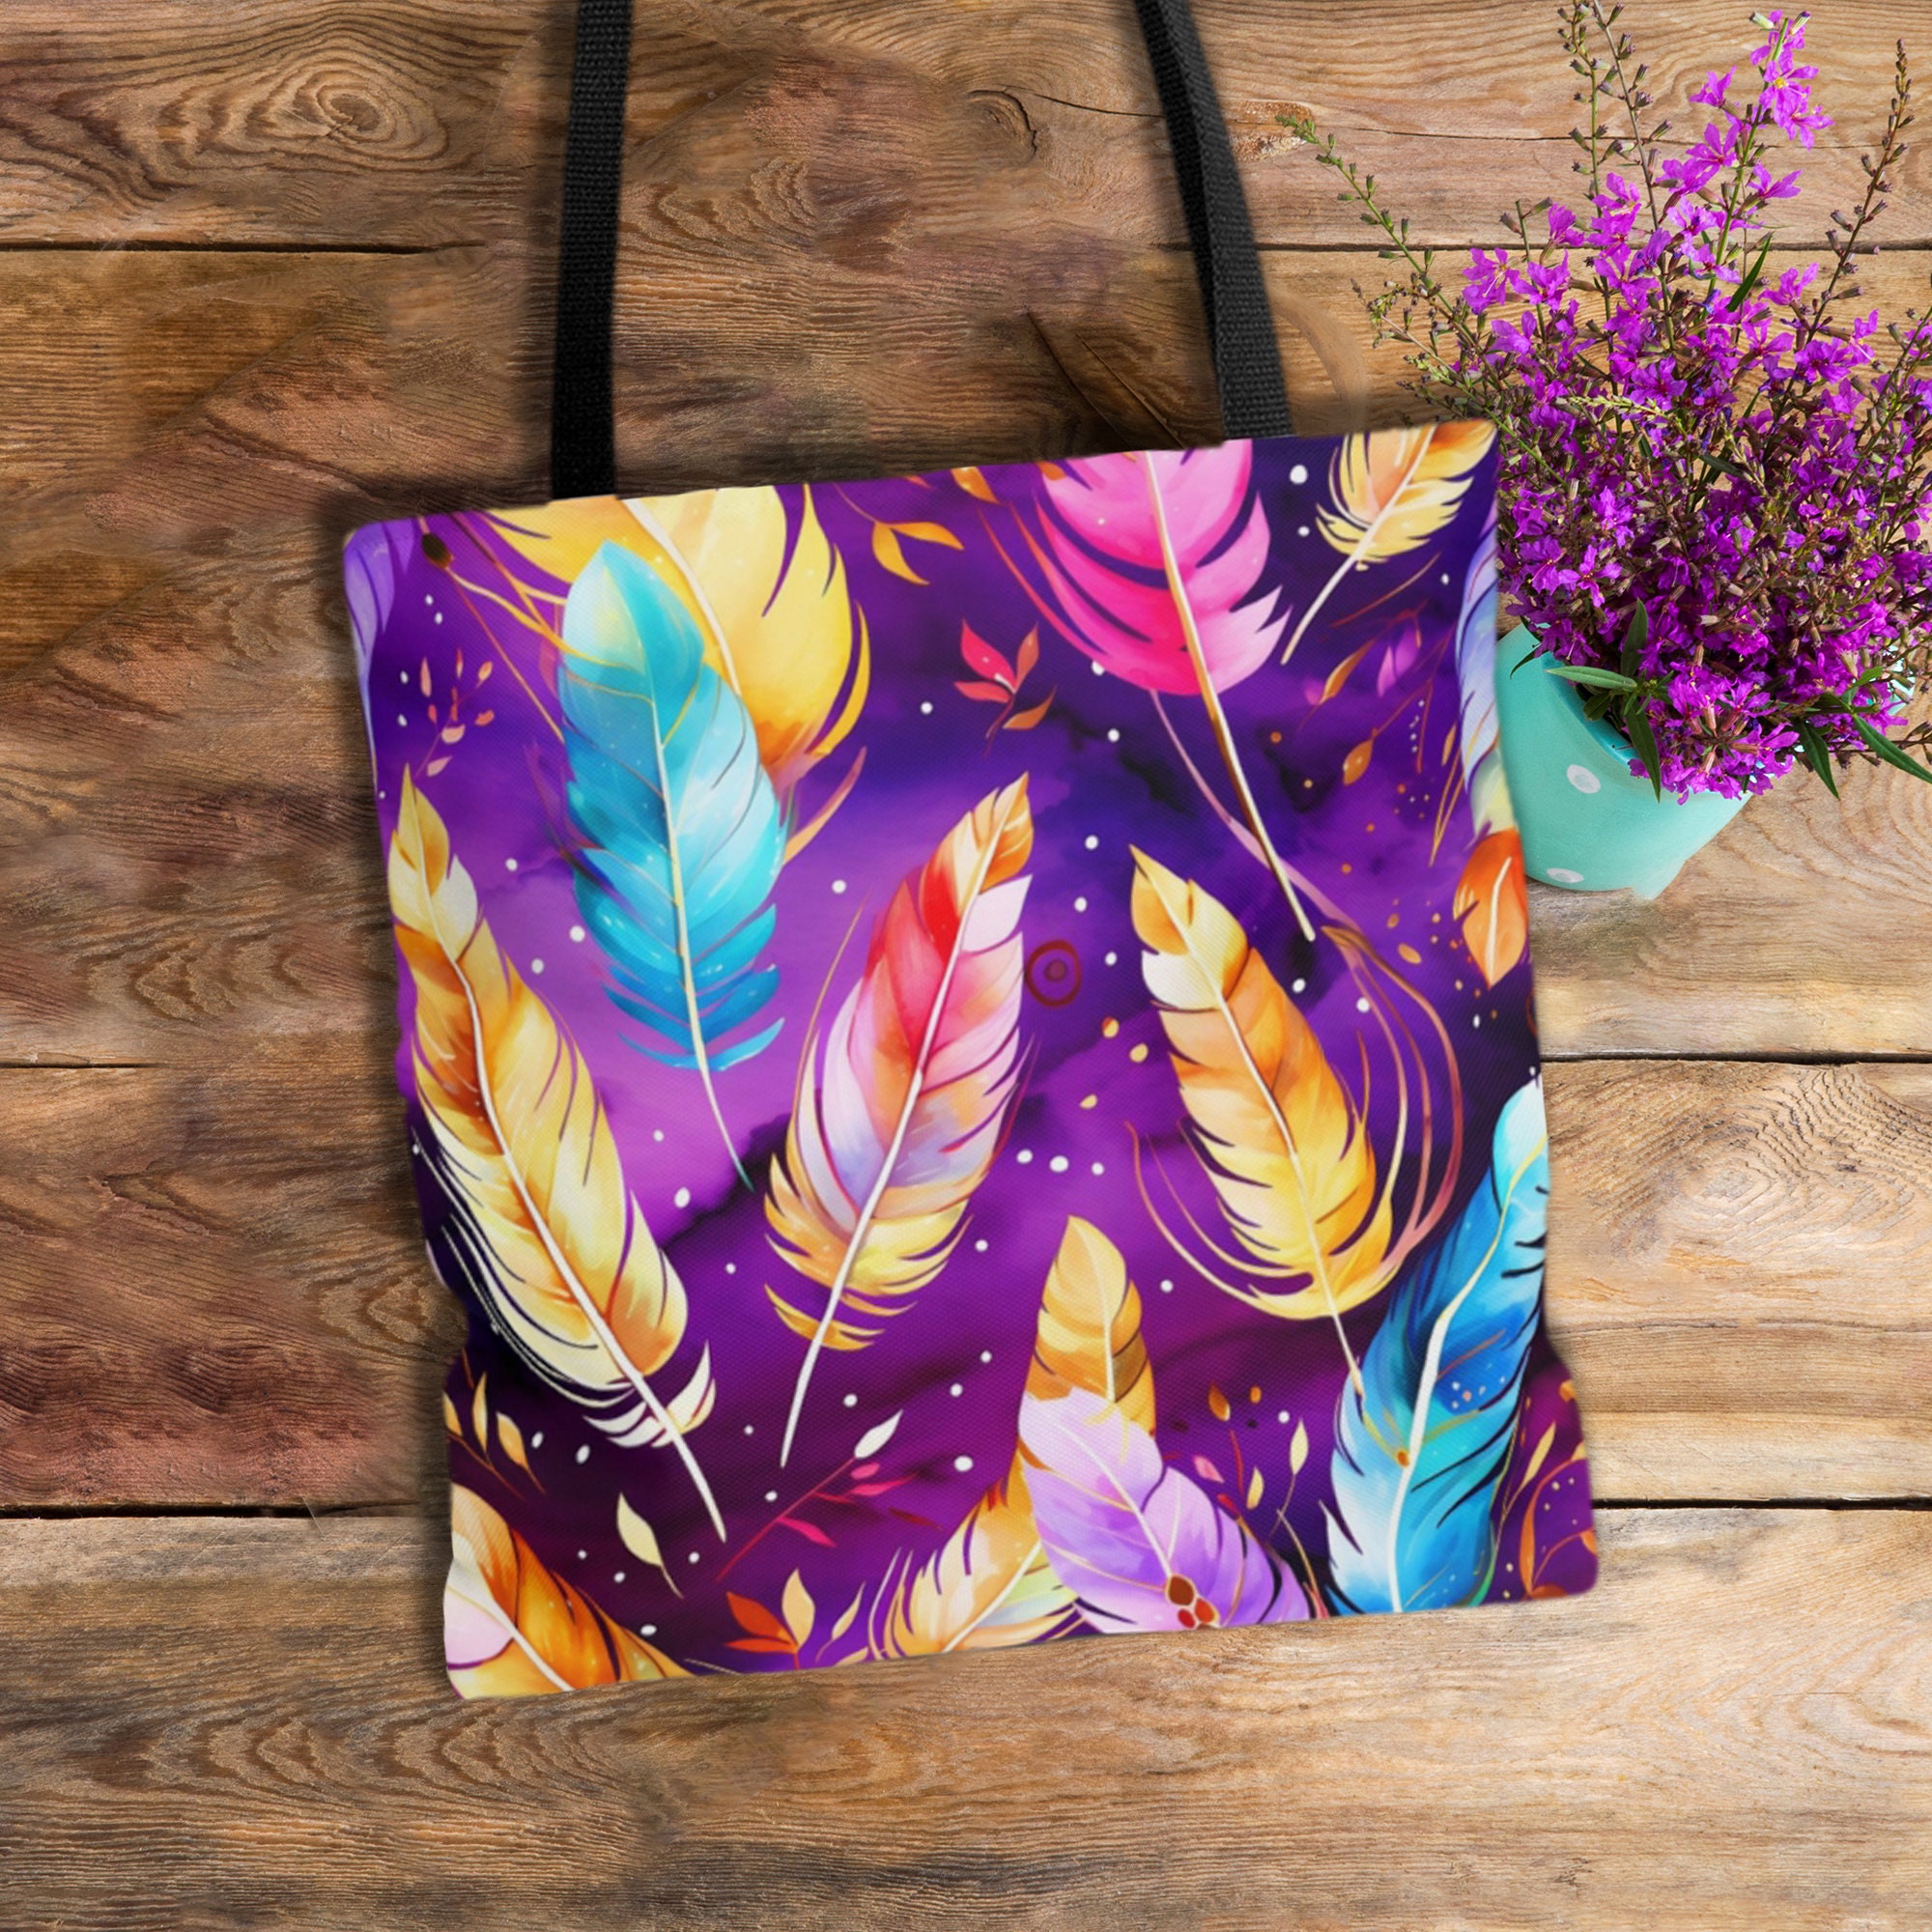 Feathers Bag Colorful Bag Feather Lover Bag Colorful - Etsy